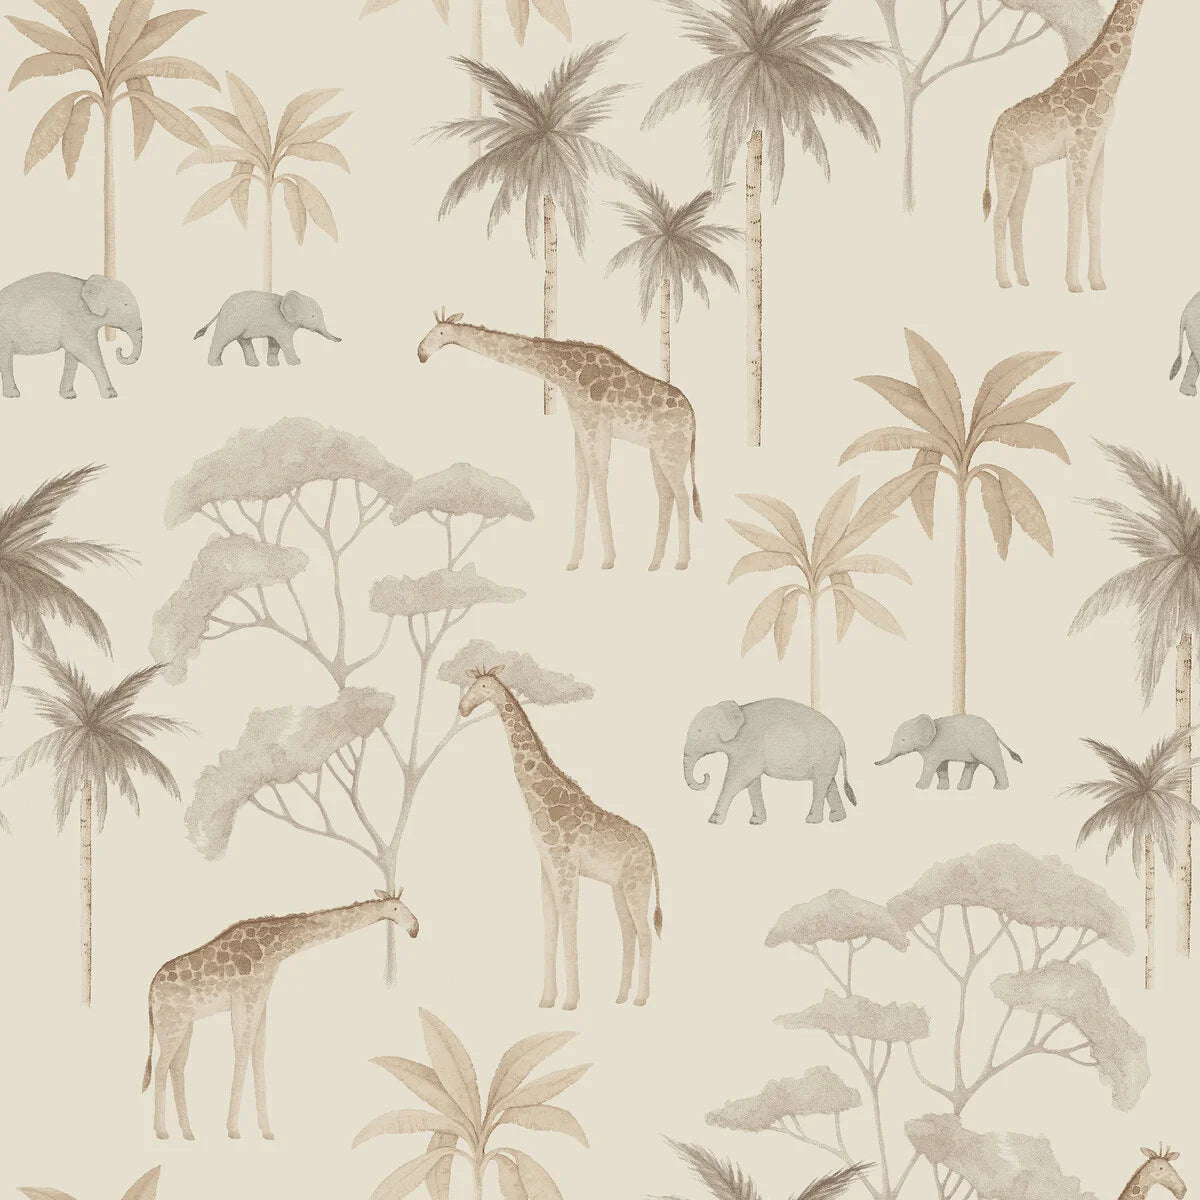 Our Savannah children’s wallpaper in natural tones of light linen, soft grey and golden beige on a sand-colored background